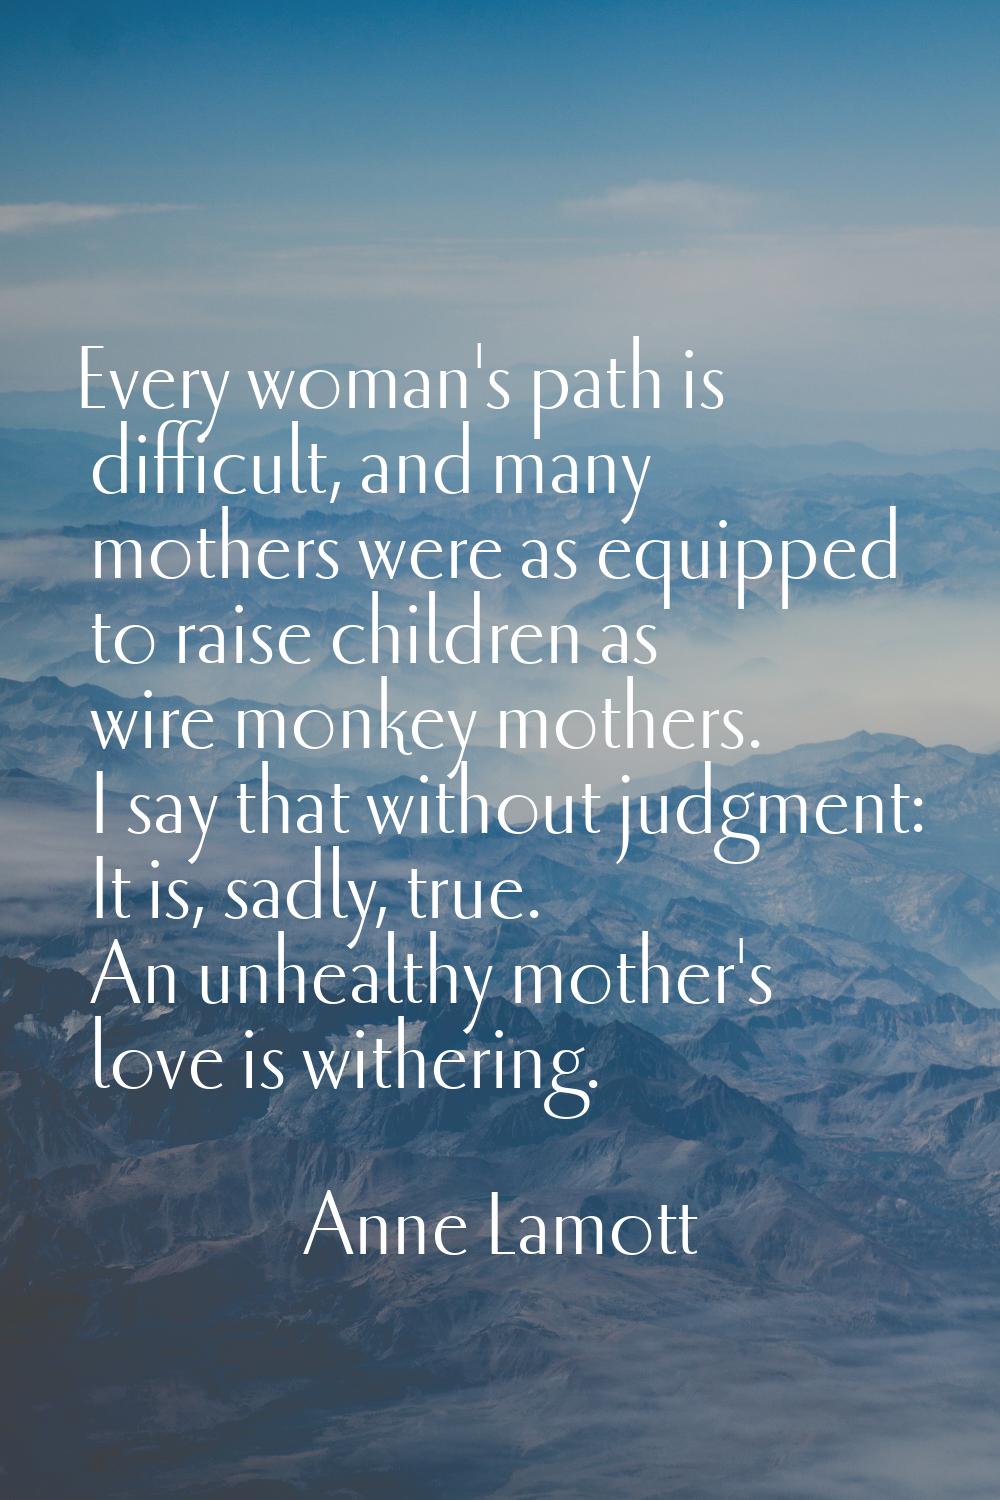 Every woman's path is difficult, and many mothers were as equipped to raise children as wire monkey